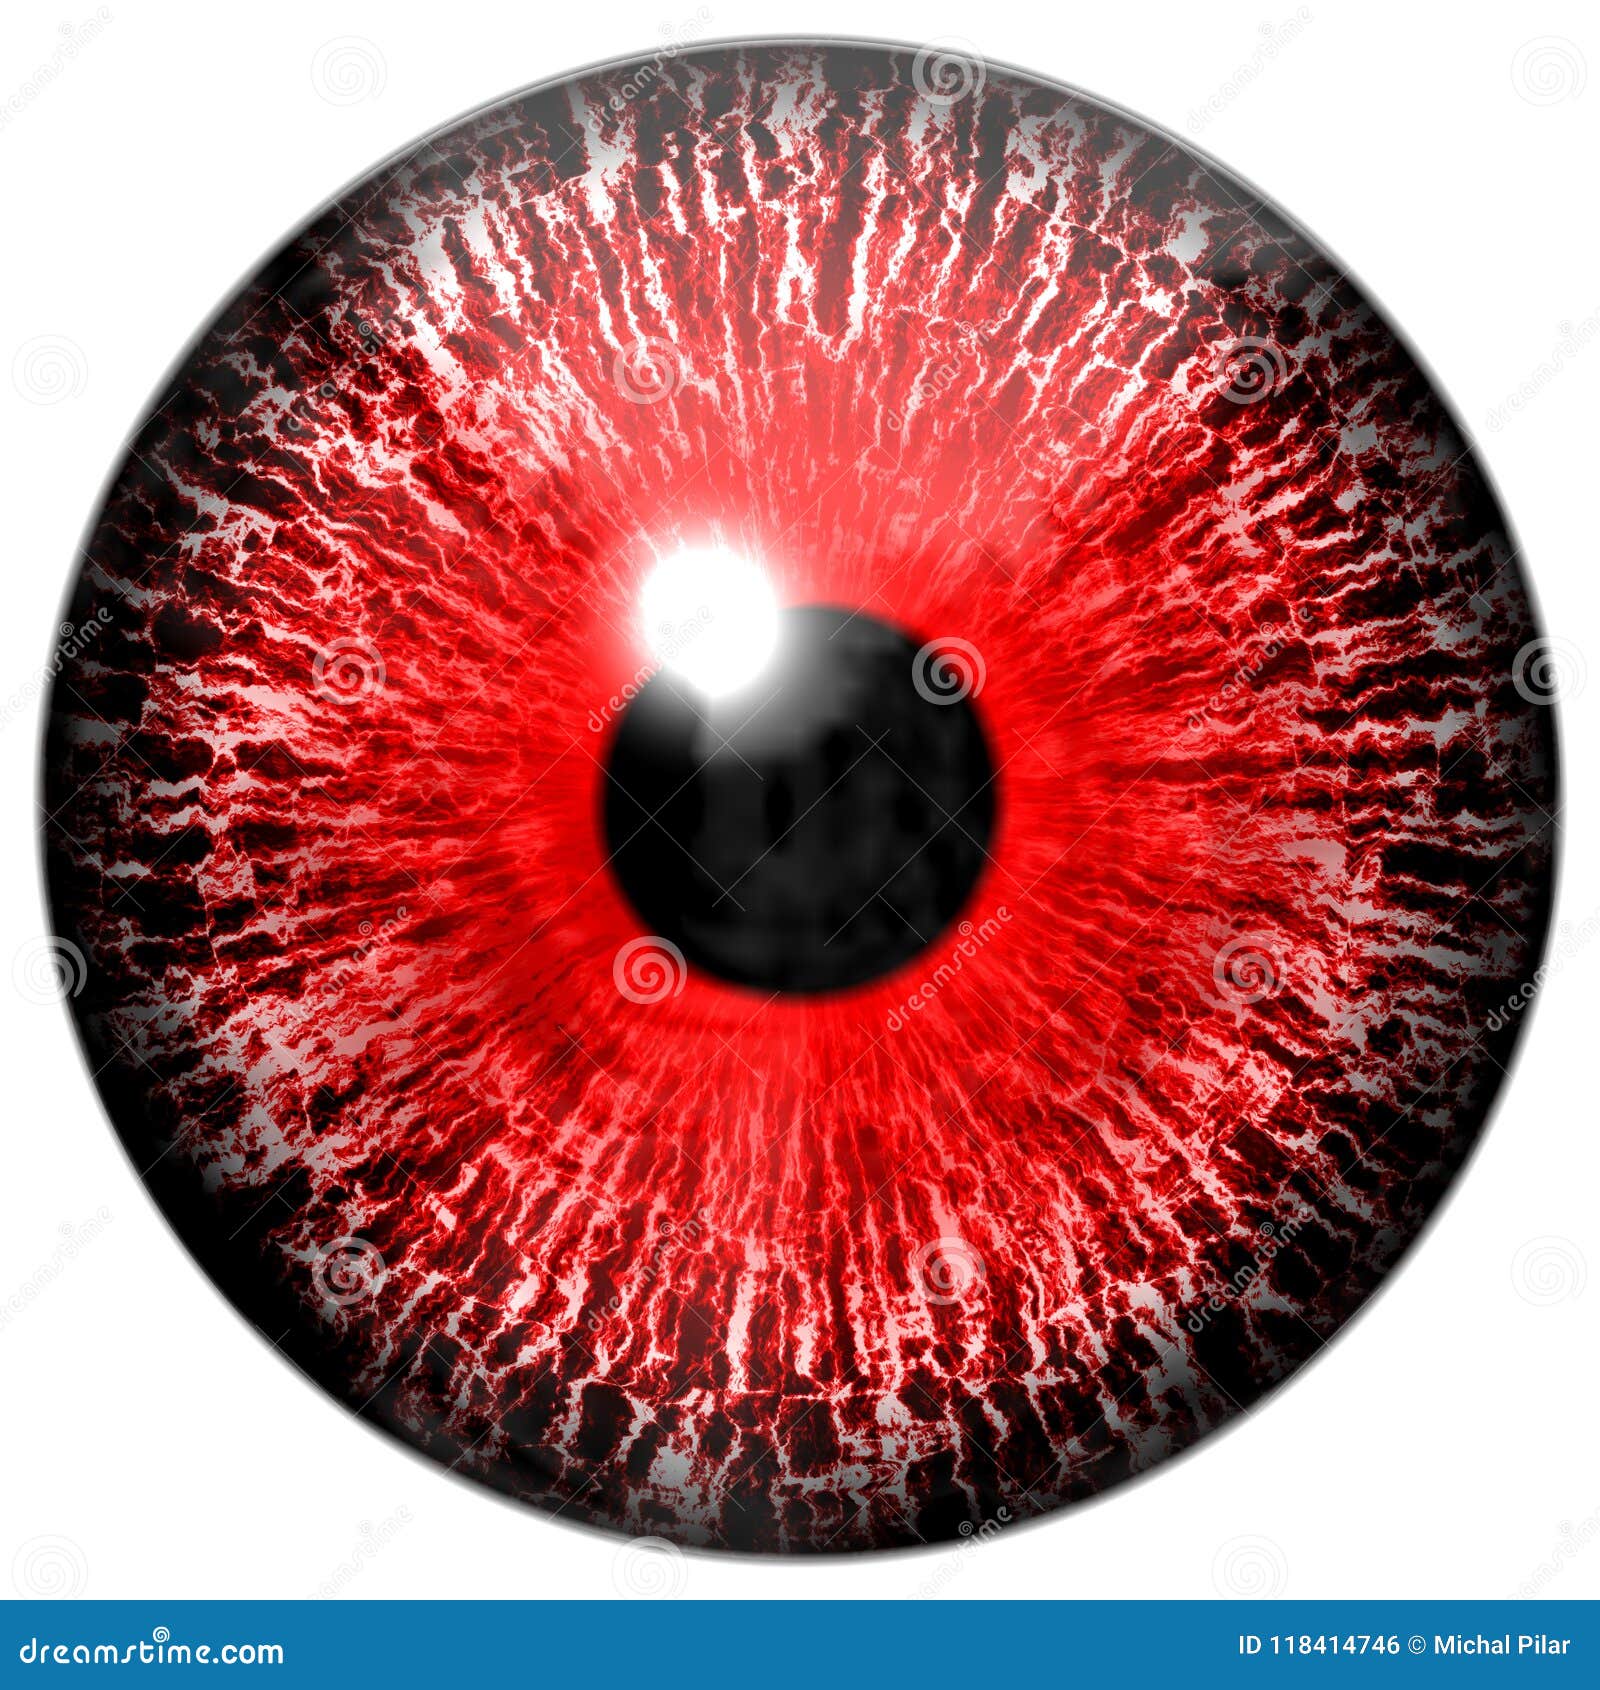 Texture red eye stock photo. Image of element, grey - 118414746